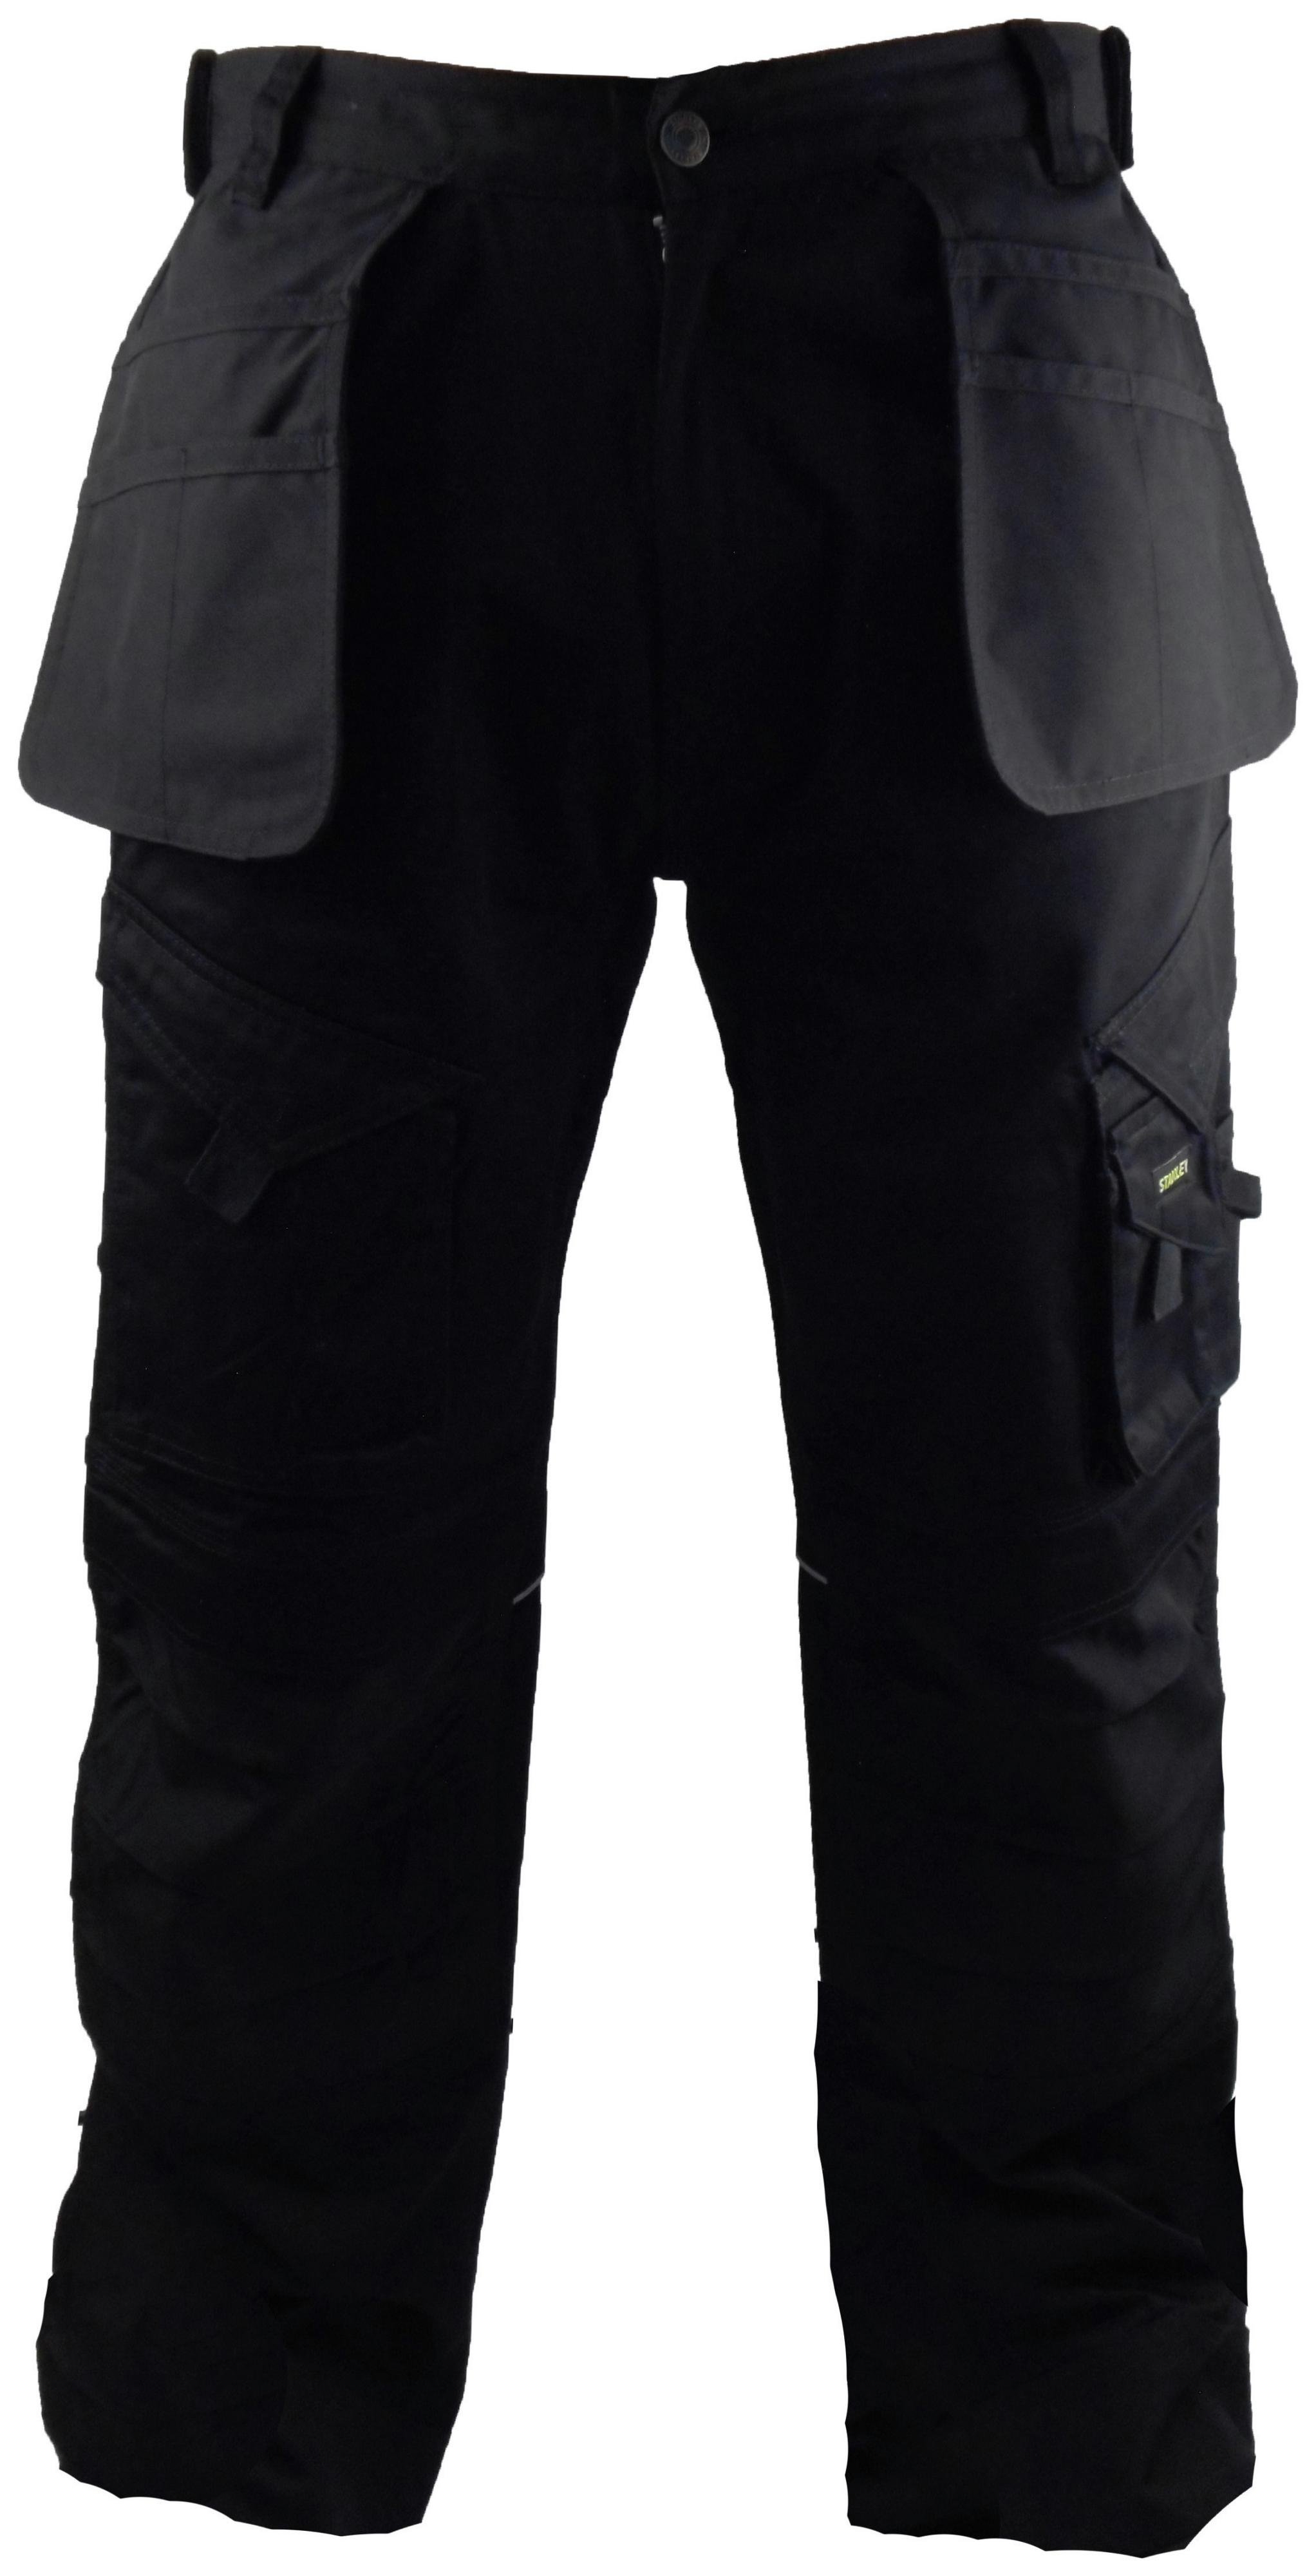 Stanley Colorado Men's Black Trouser - 30 to 31 inch. Review